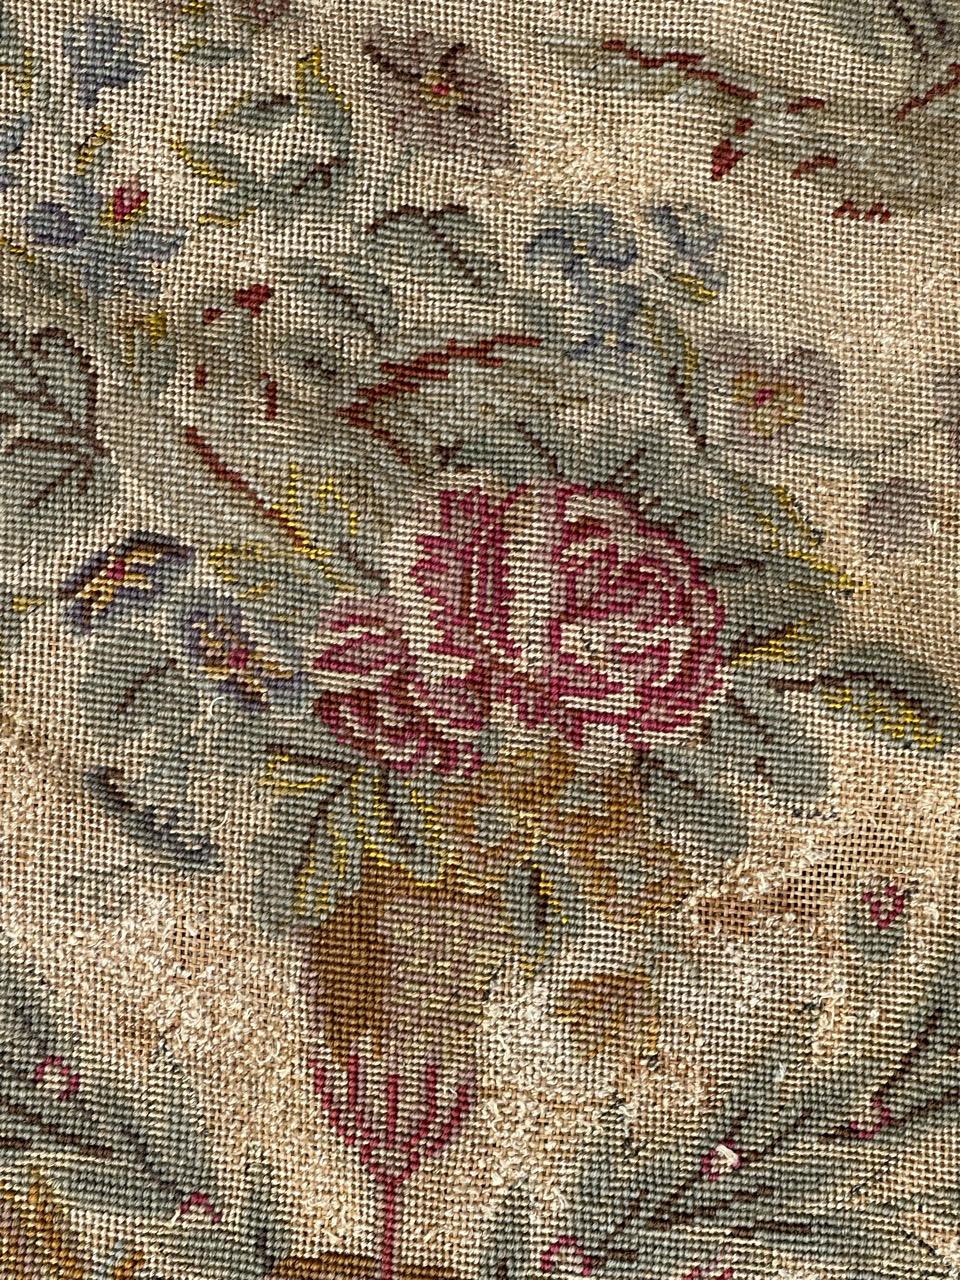 Exquisite late 19th-century French needlepoint tapestry originally from a chair cover but can be also use for cushions, or frames. Adorned with a captivating floral design from the Napoleon III era, this piece showcases vibrant natural colors.